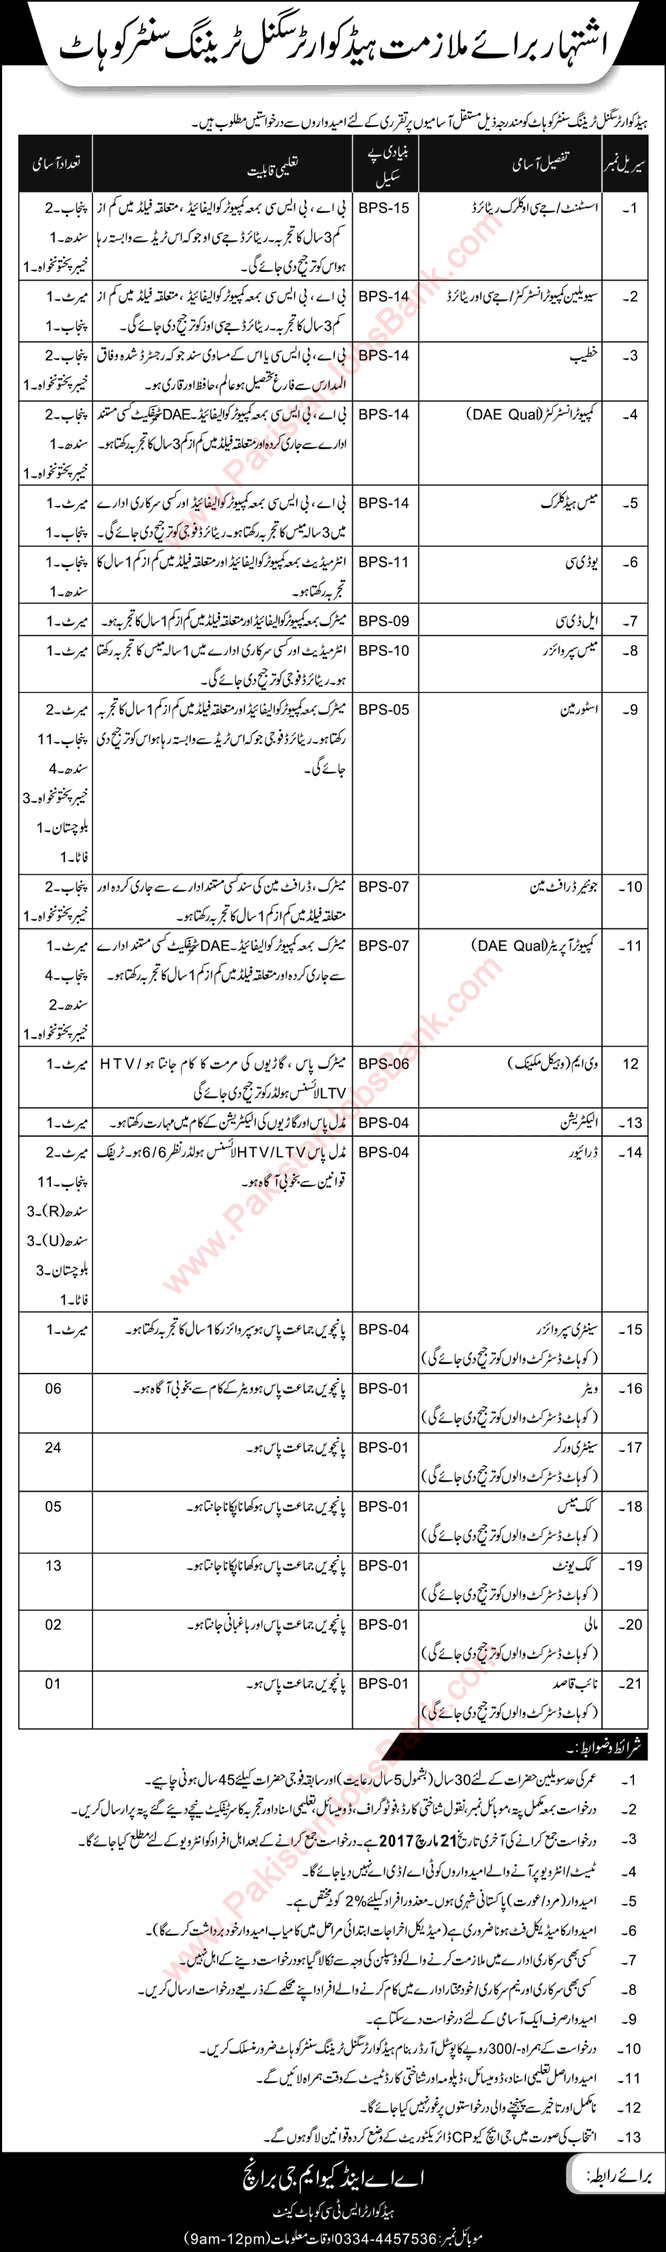 Headquarter Signal Training Center Kohat Jobs 2017 March Pakistan Army Storeman, Clerks, Drivers & Others Latest